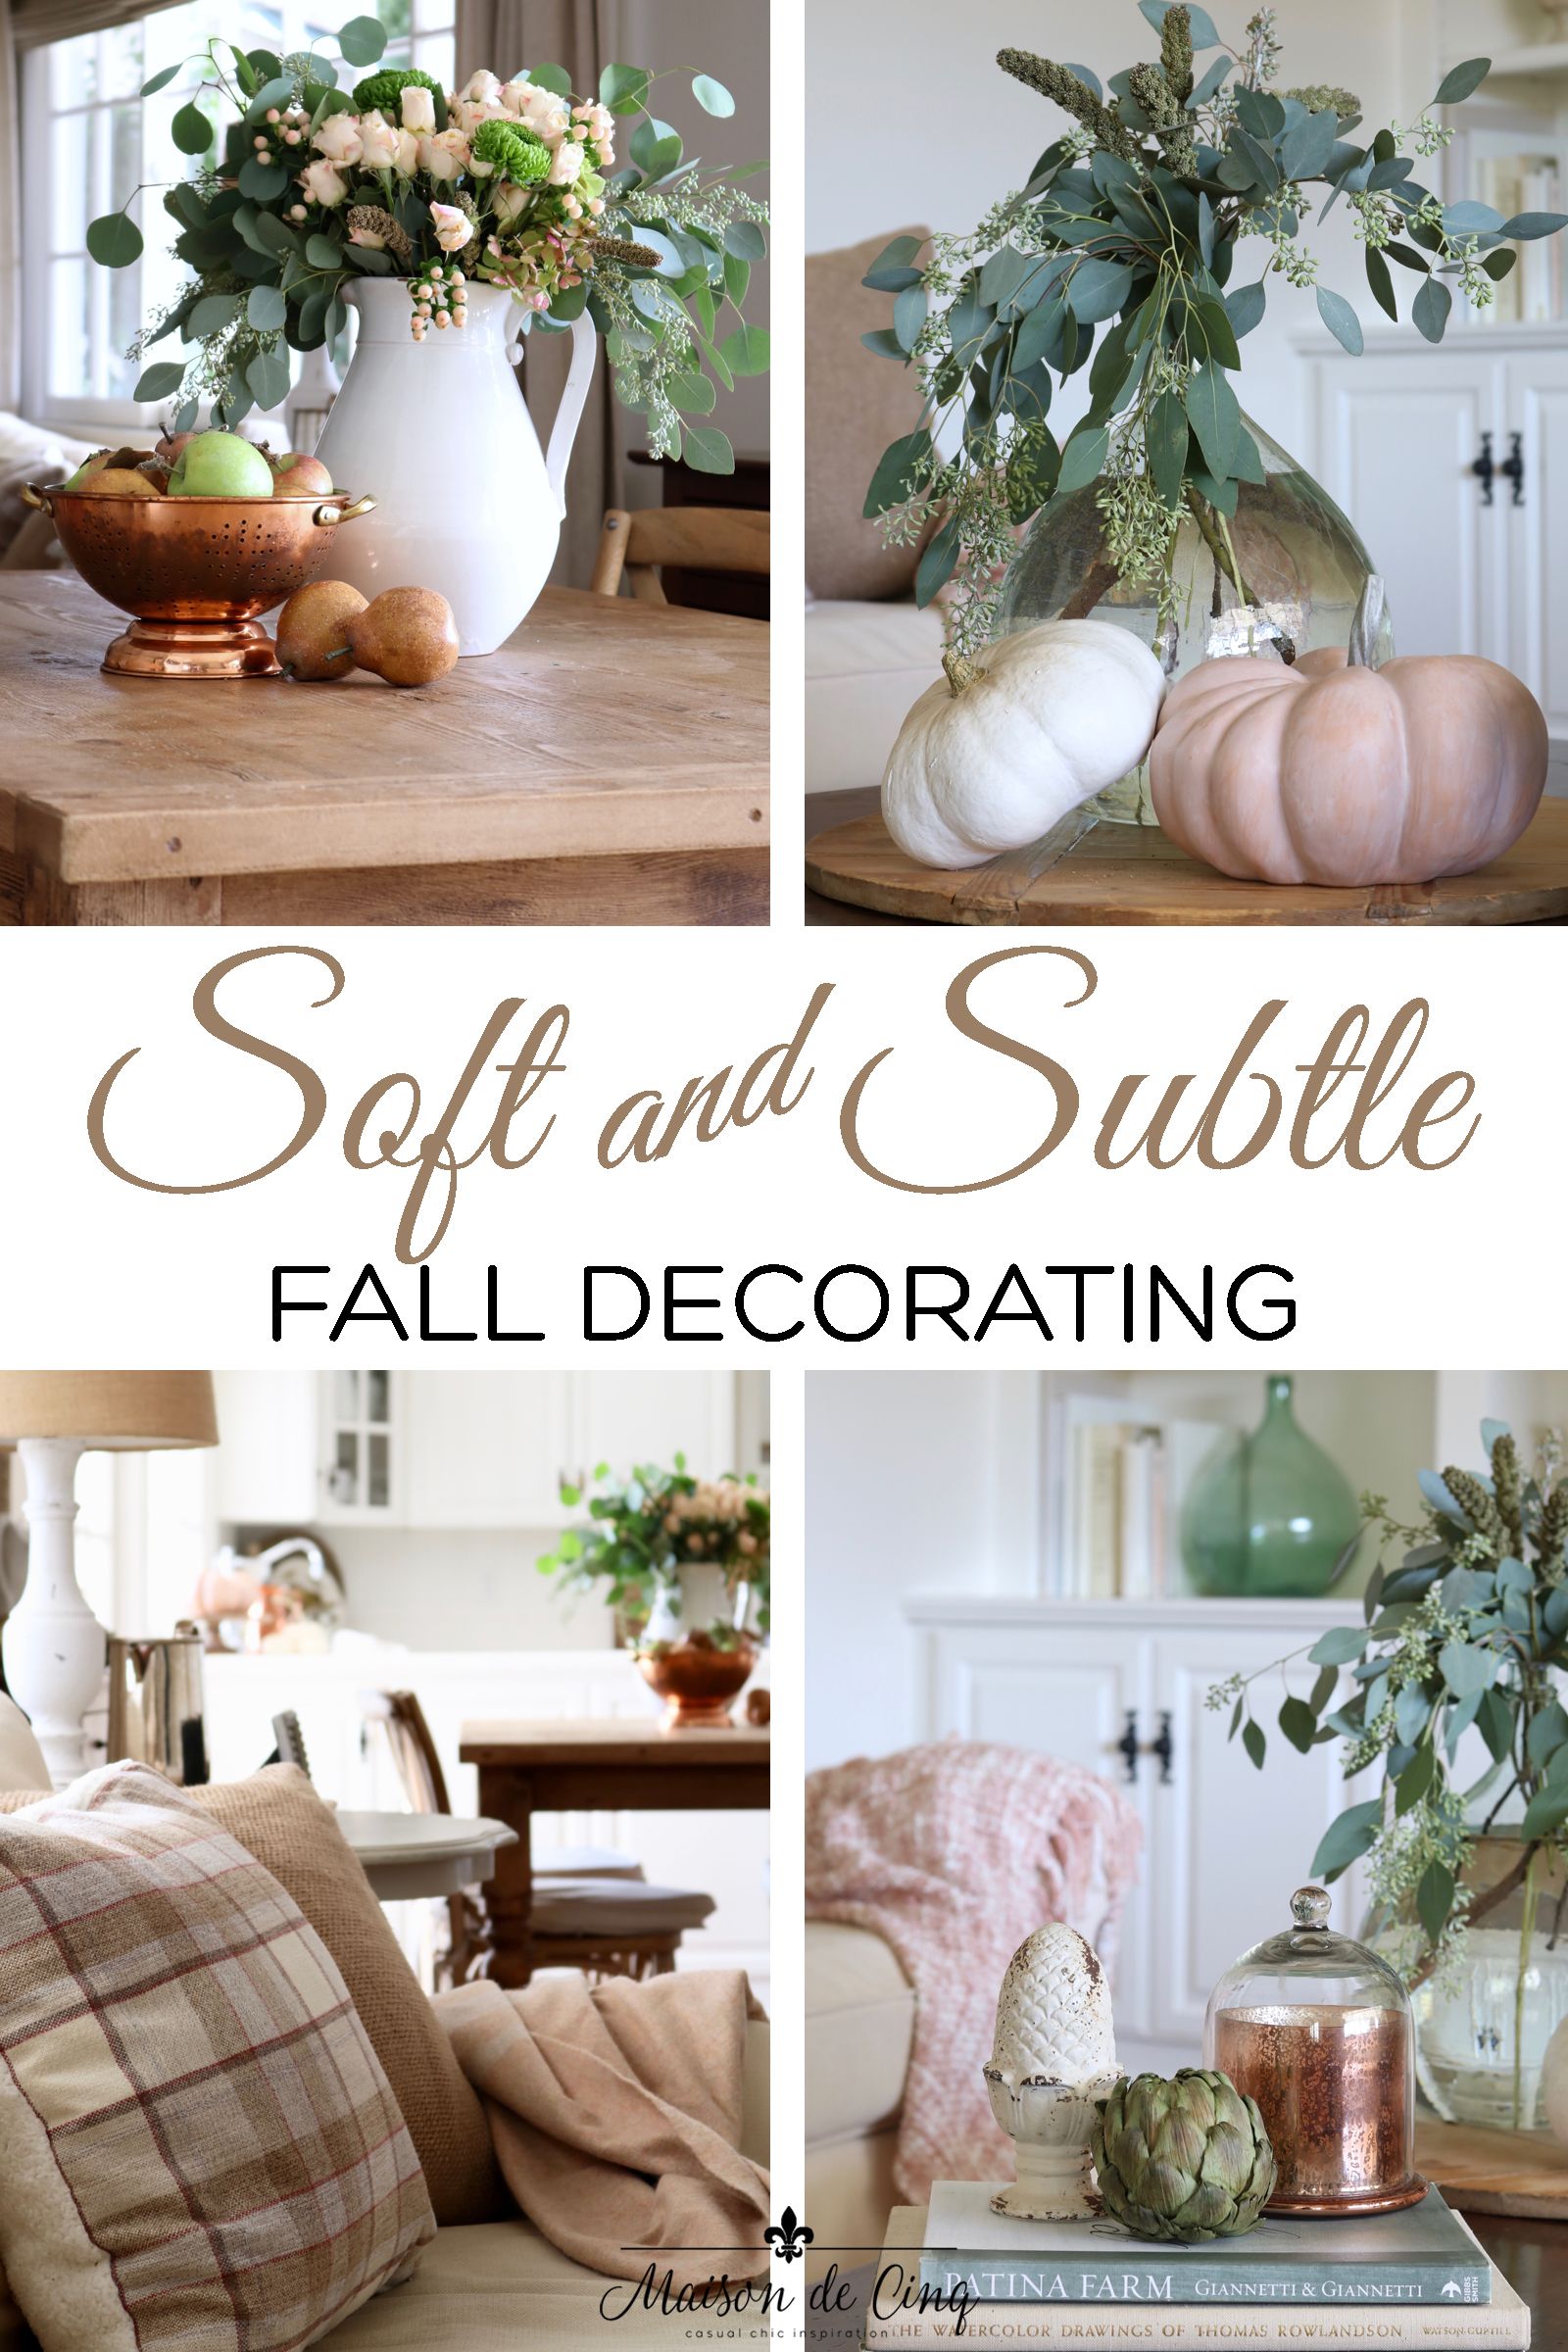 Soft and Subtle Fall Decorating Ideas